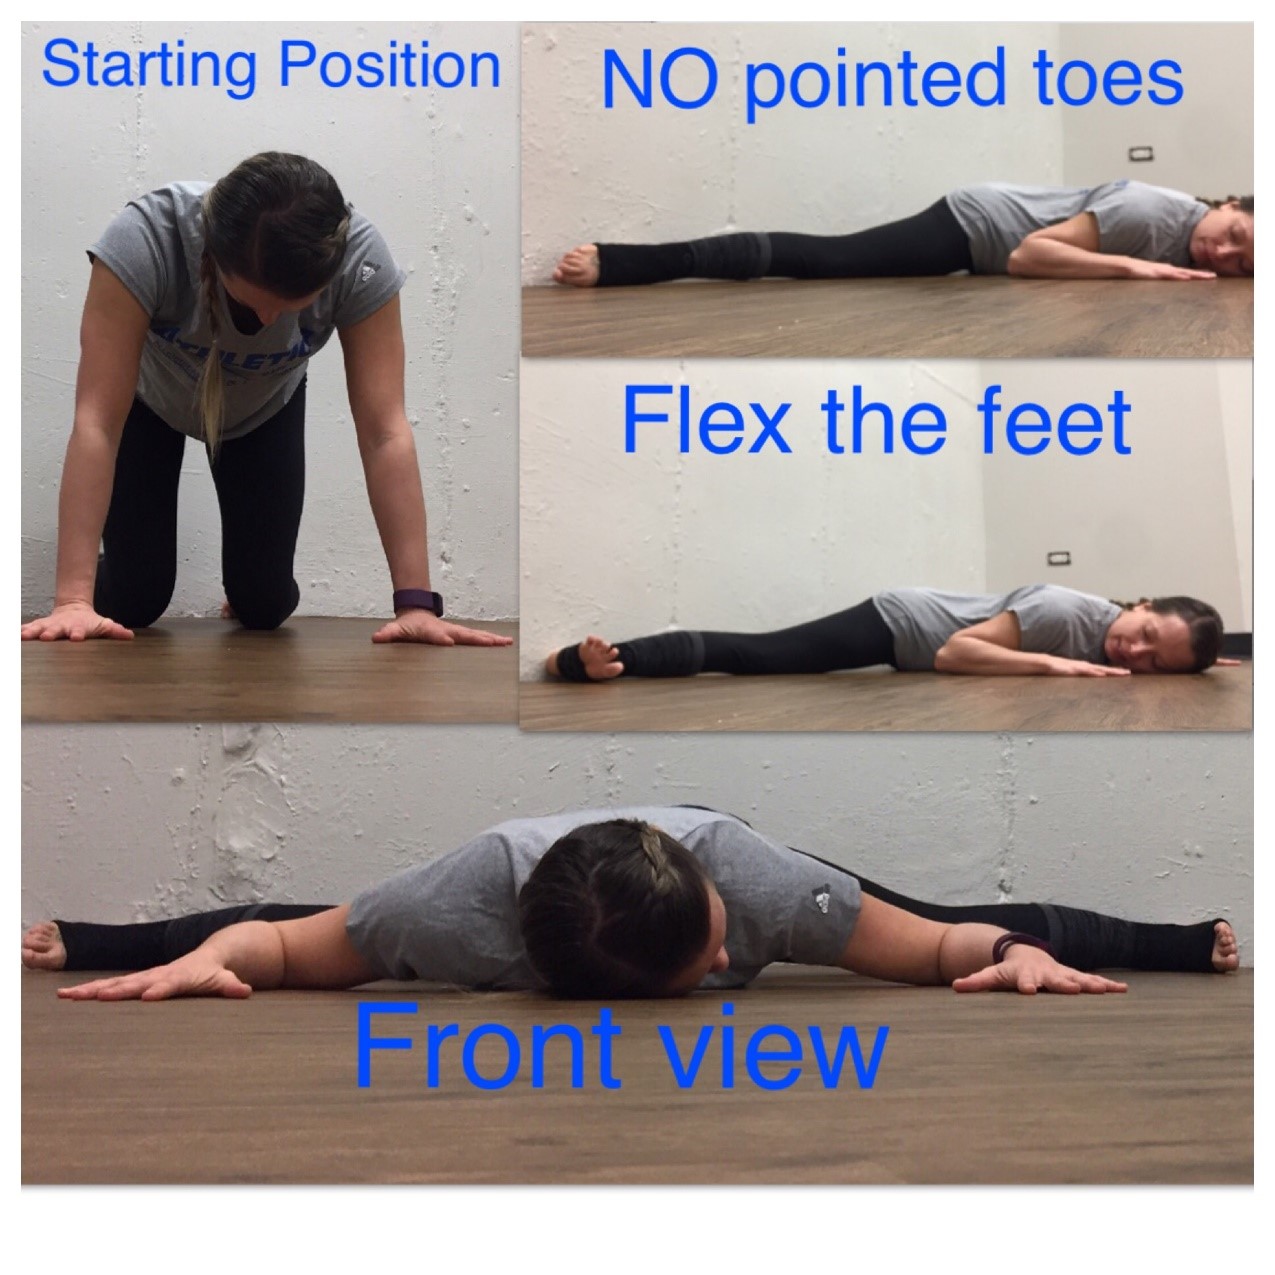 Stretch of the Week: Wide Legged Straddle (Prone Position)